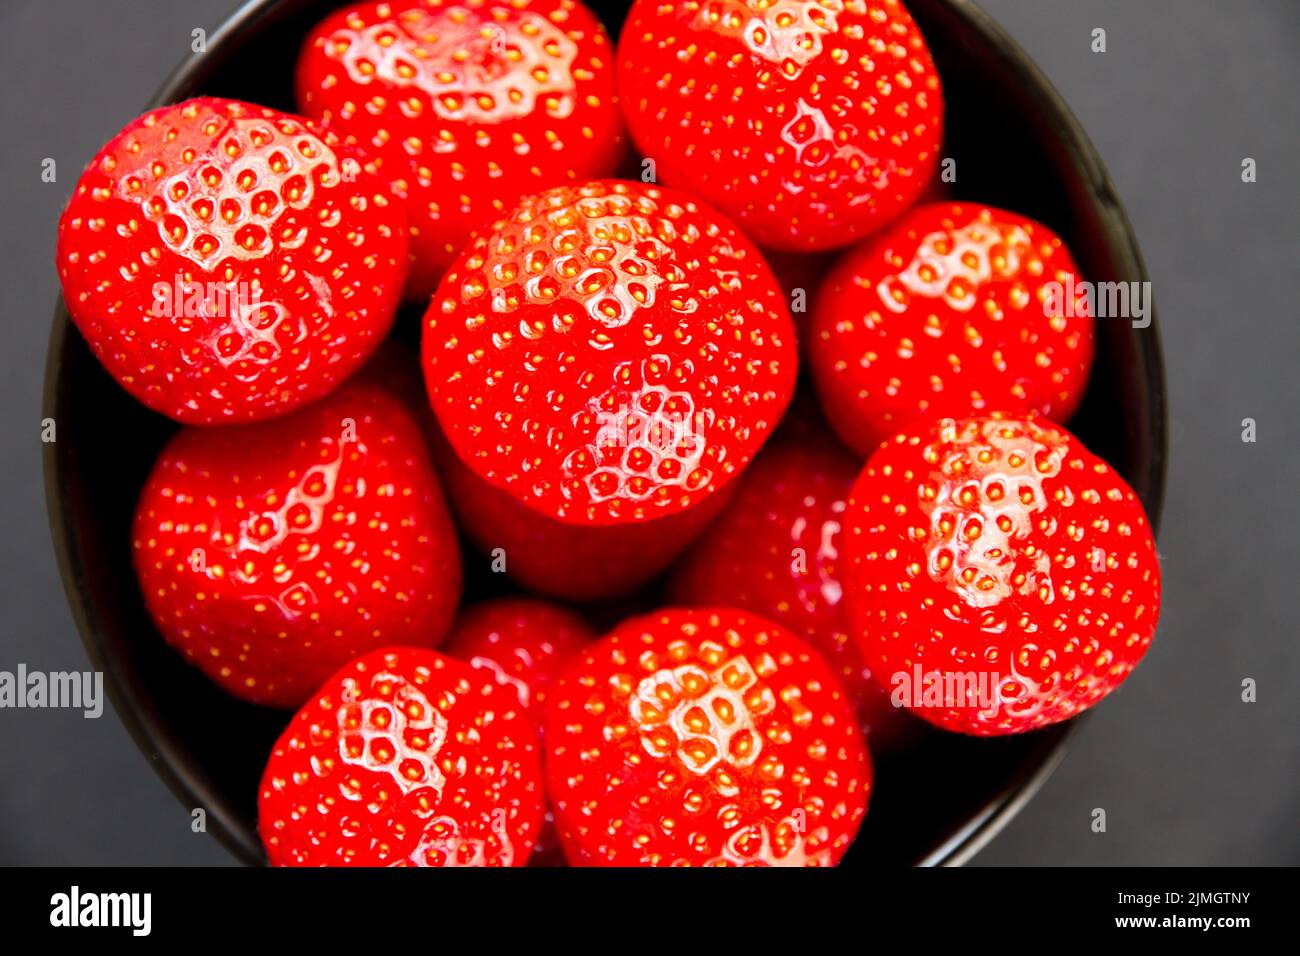 Strawberries in a bowl. Black background Stock Photo